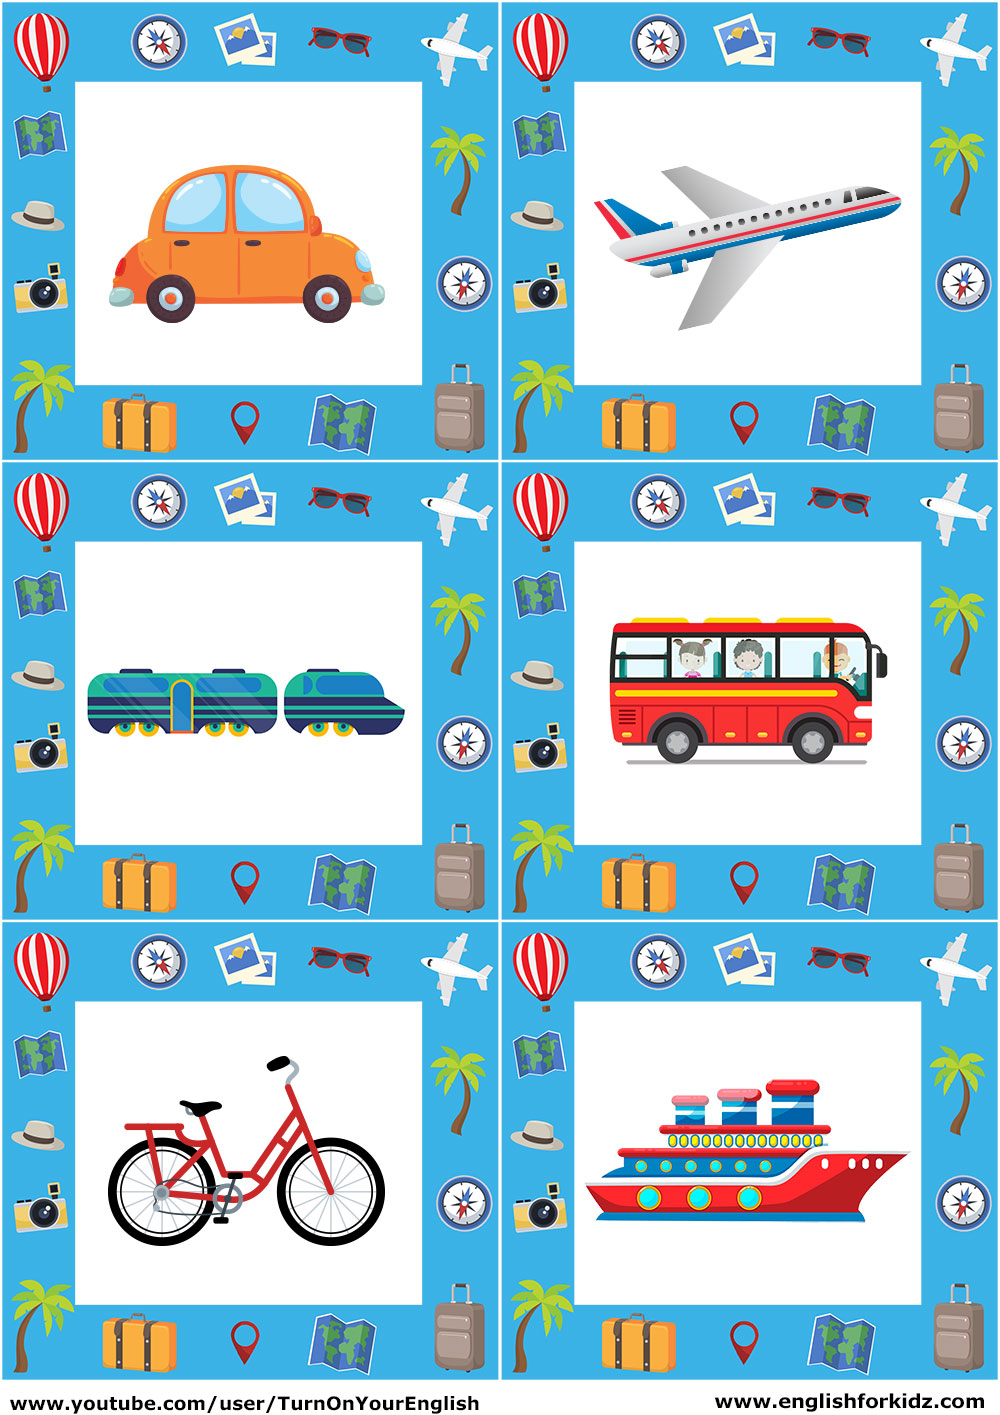 Means of Transport Vocabulary Flashcards  Transportation preschool,  Flashcards, Transportation